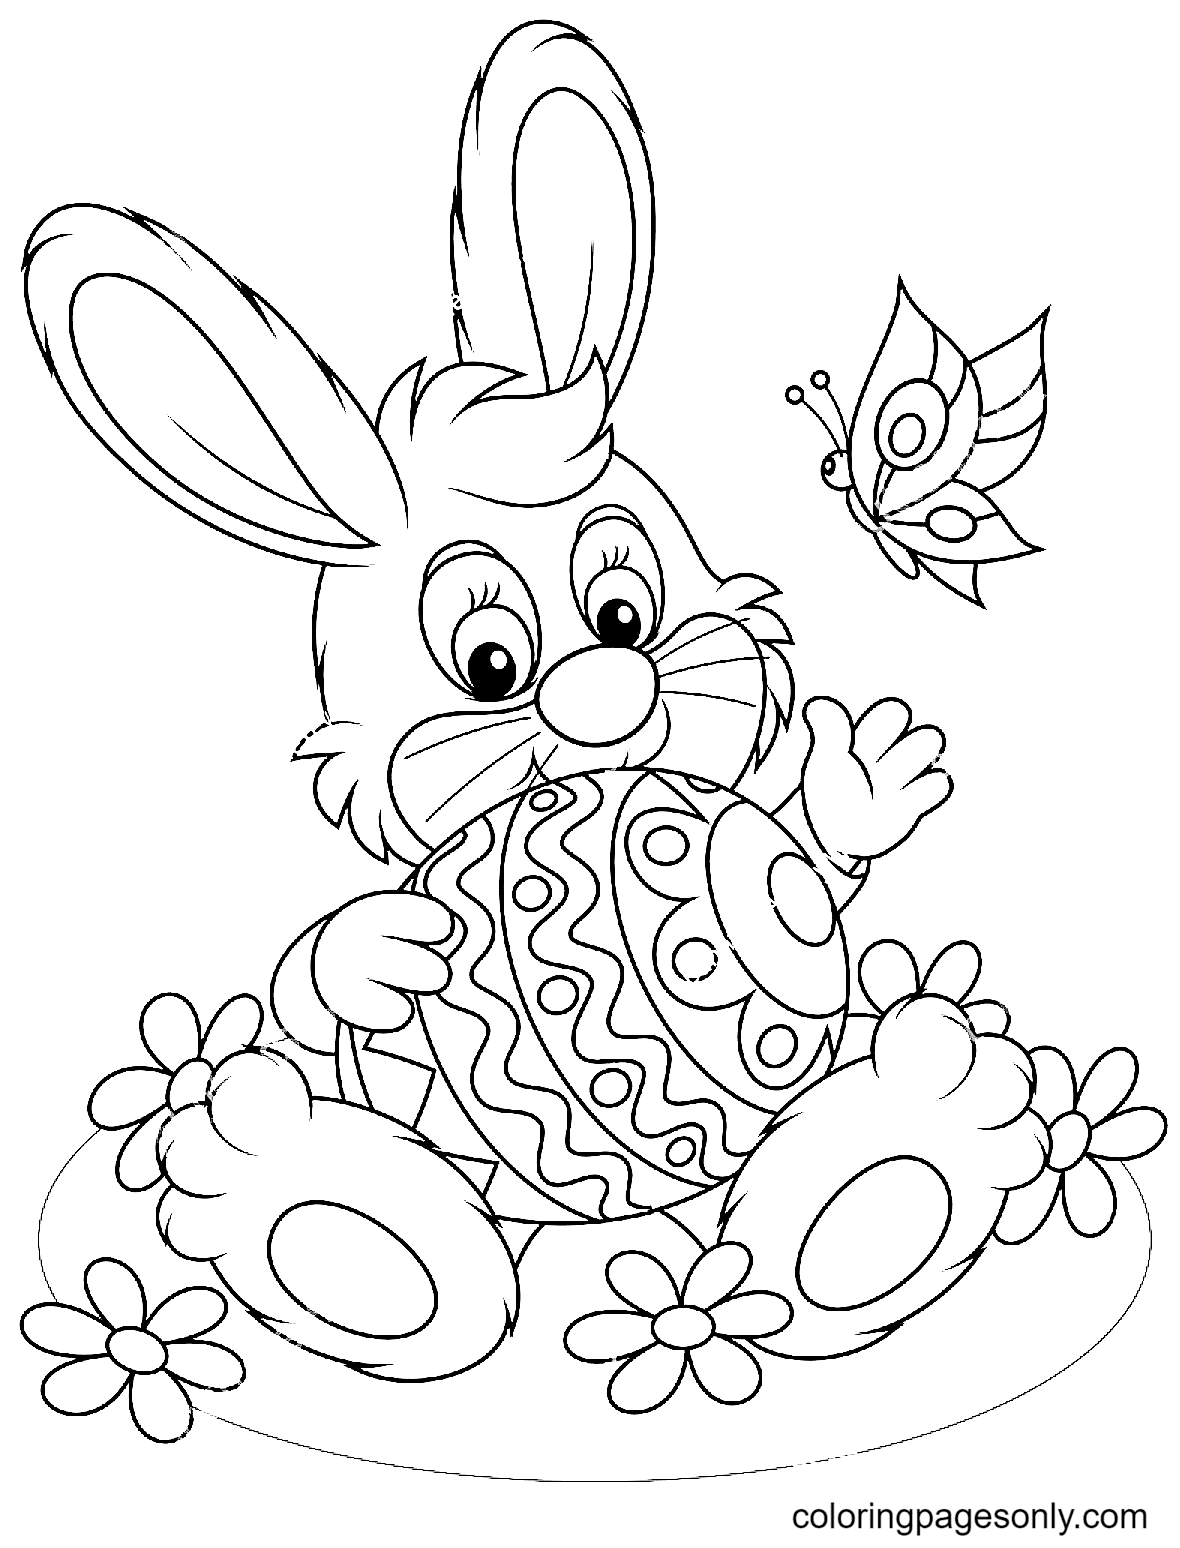 Bunny With Butterflies Coloring Pages